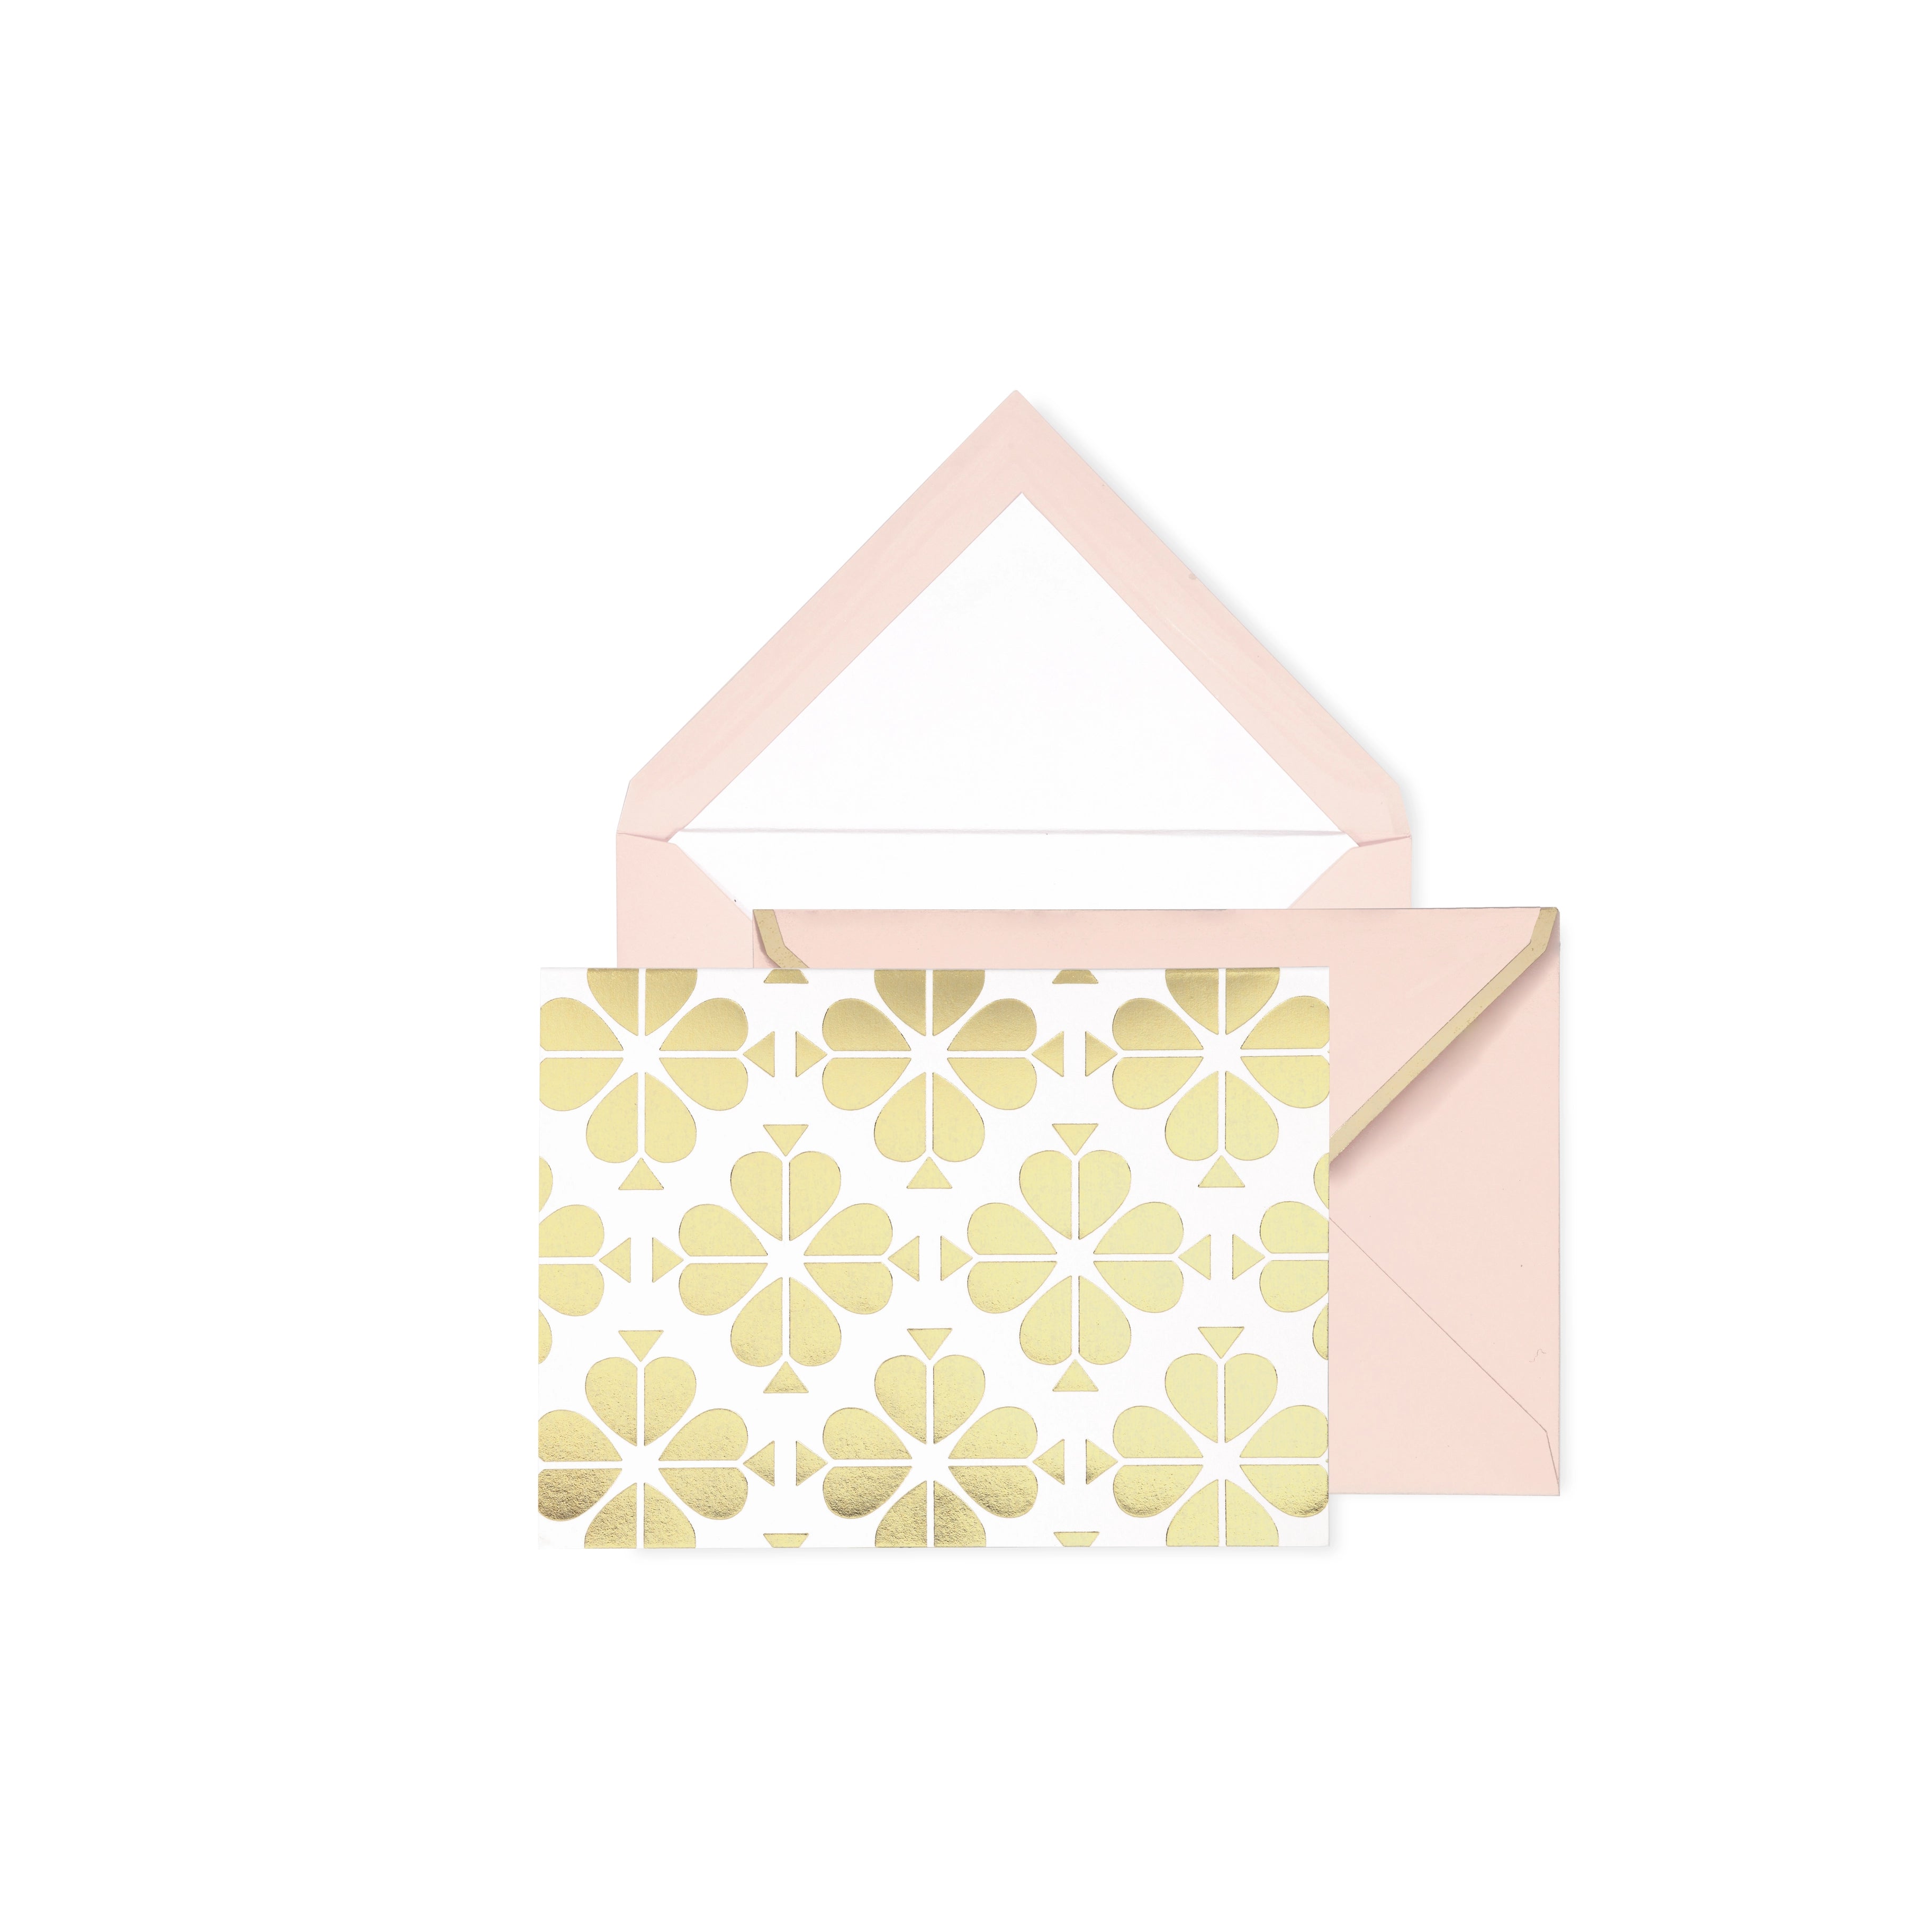 Kate Spade New York Boxed Notes - Gold Spade Flower